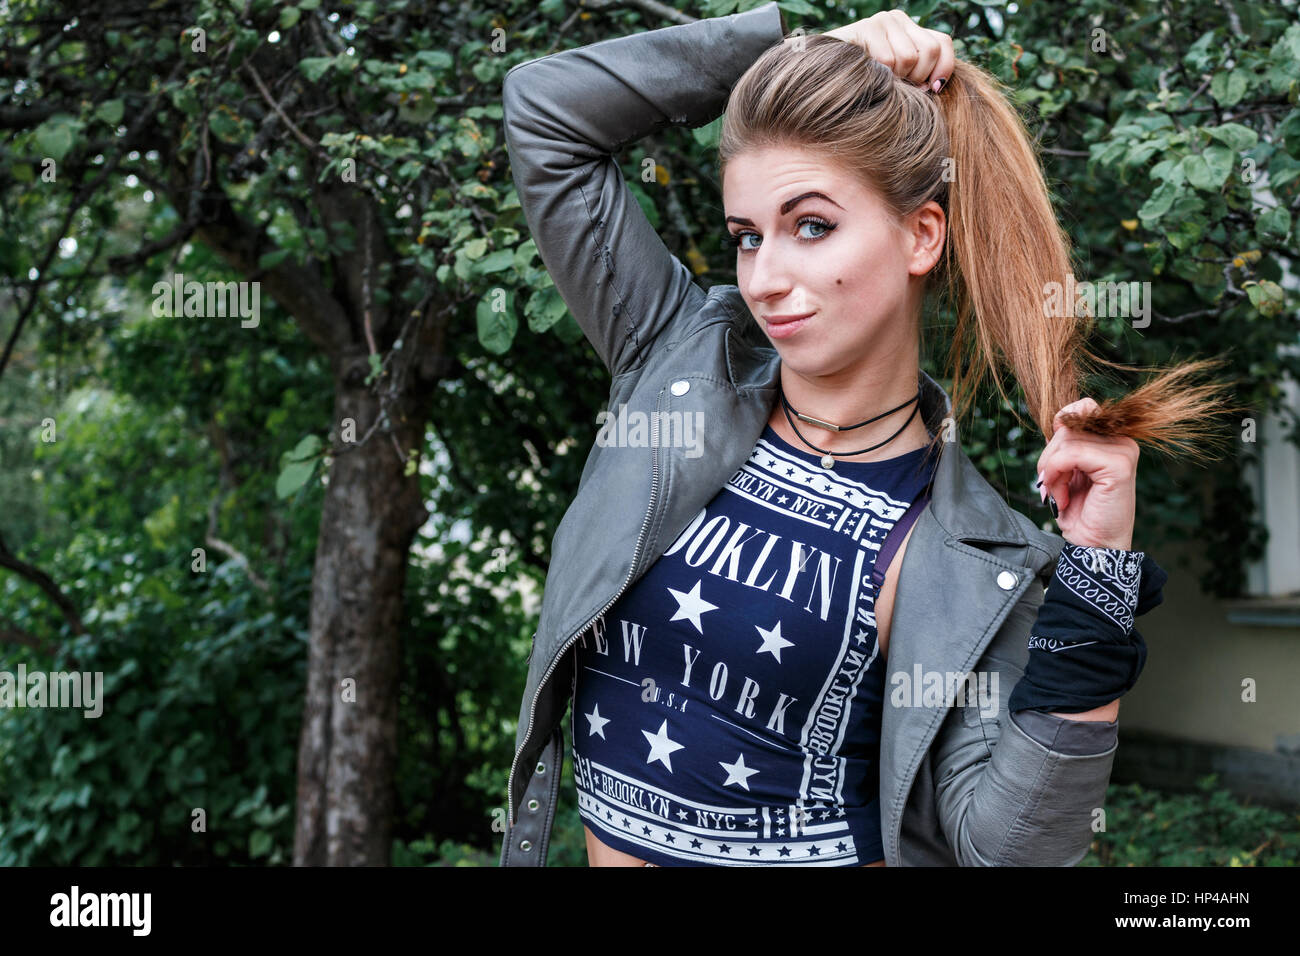 Rock Style Girl High Resolution Stock Photography and Images - Alamy